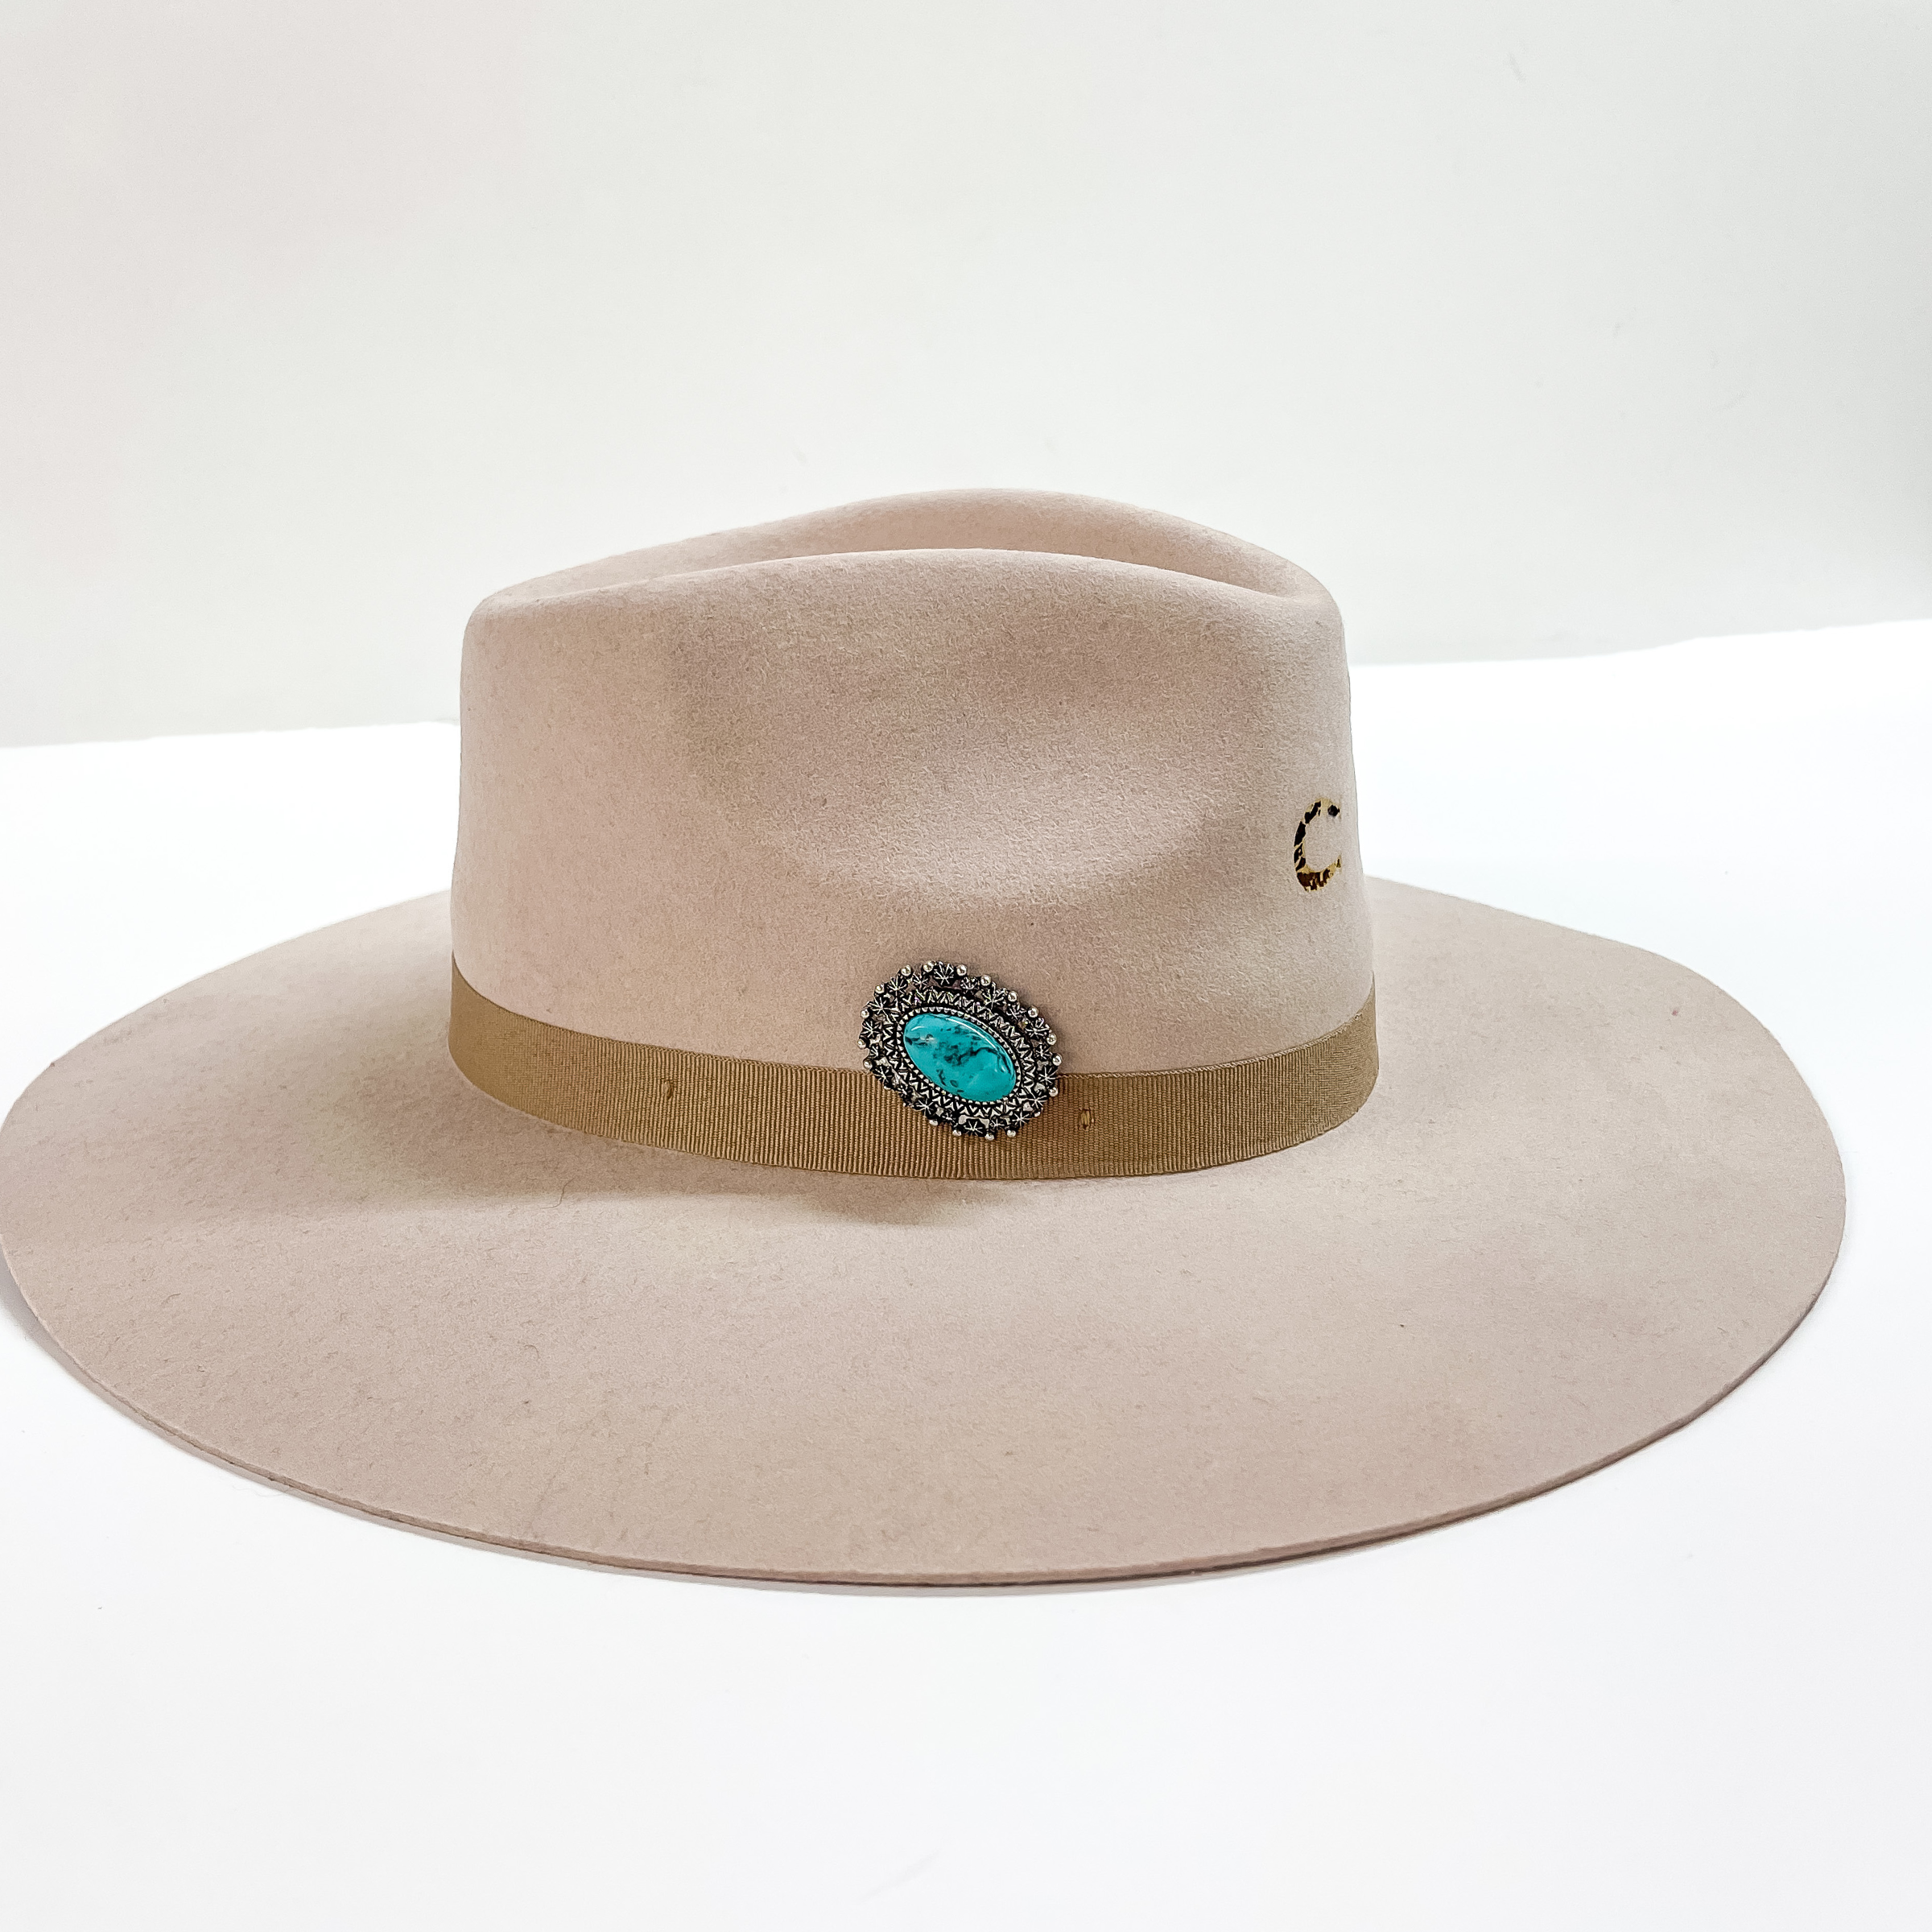 Silver Tone Oval Concho Hat Pin with Large Center Turquoise Stone - Giddy Up Glamour Boutique